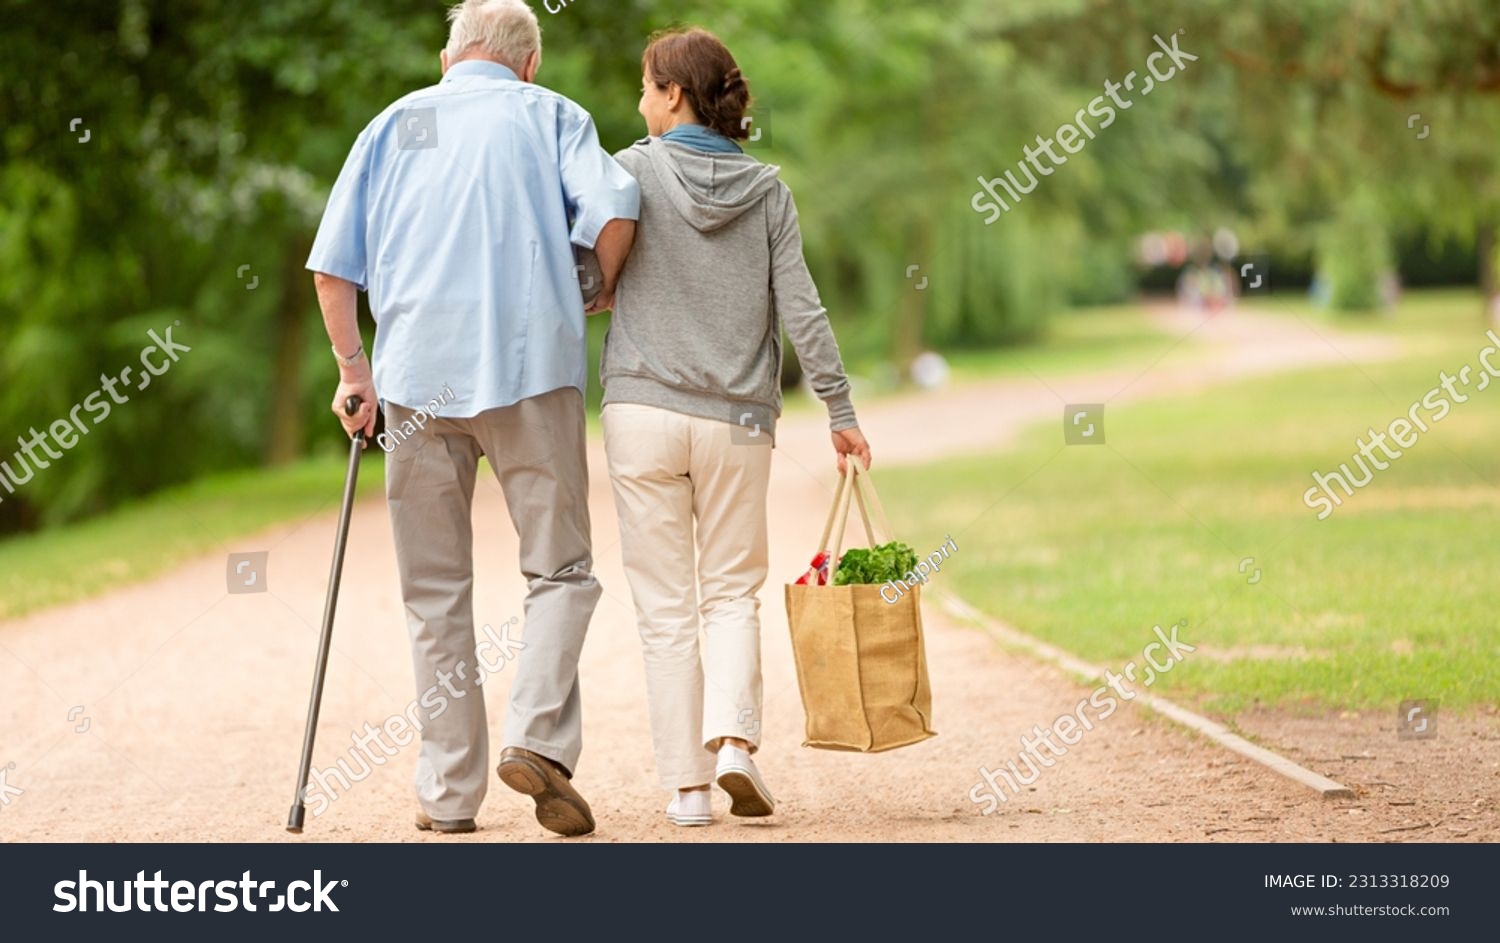 Humanity. Someone carrying grocery with an old man along roadside having stick for walking in his hand.  #2313318209